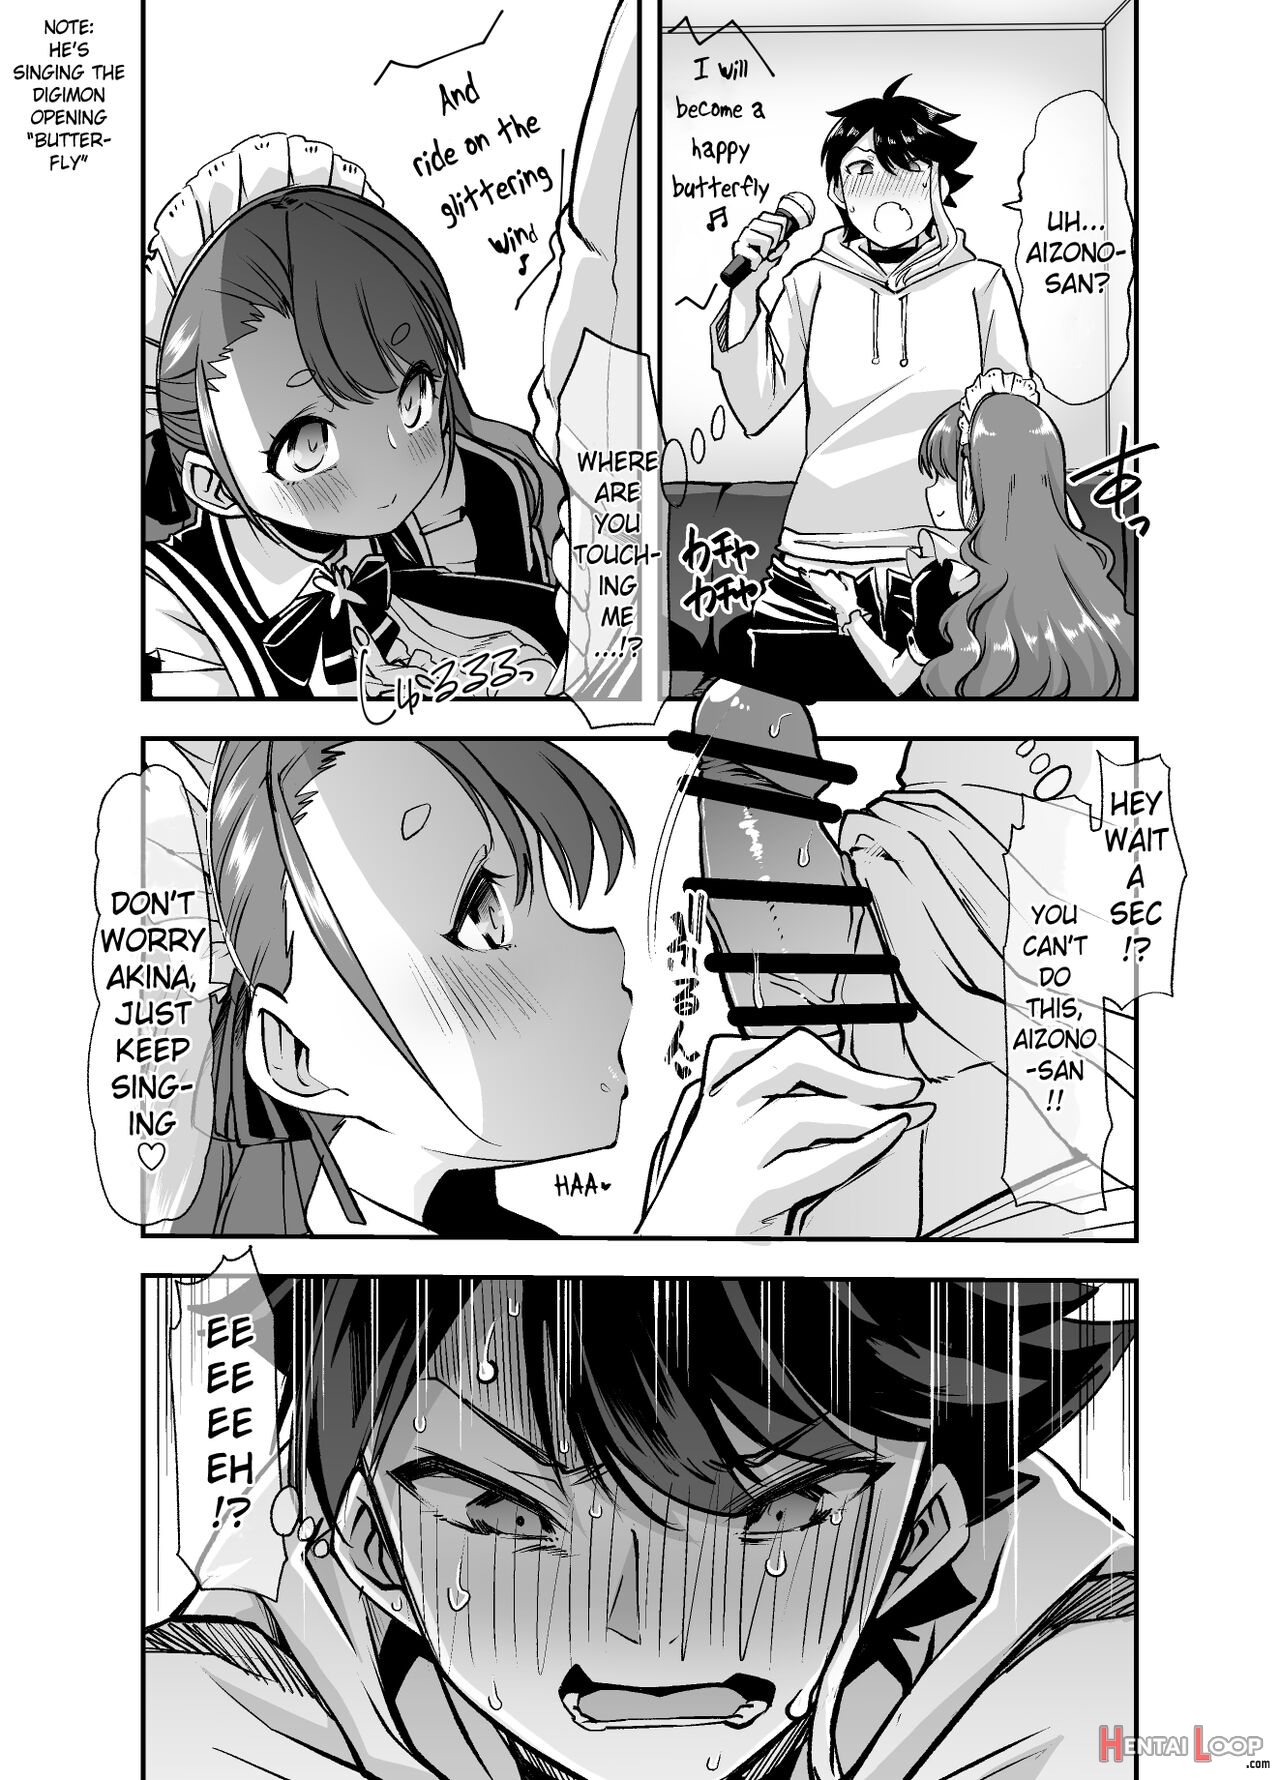 A Book About Akina Finally Finding Happiness With Aizono-san page 3